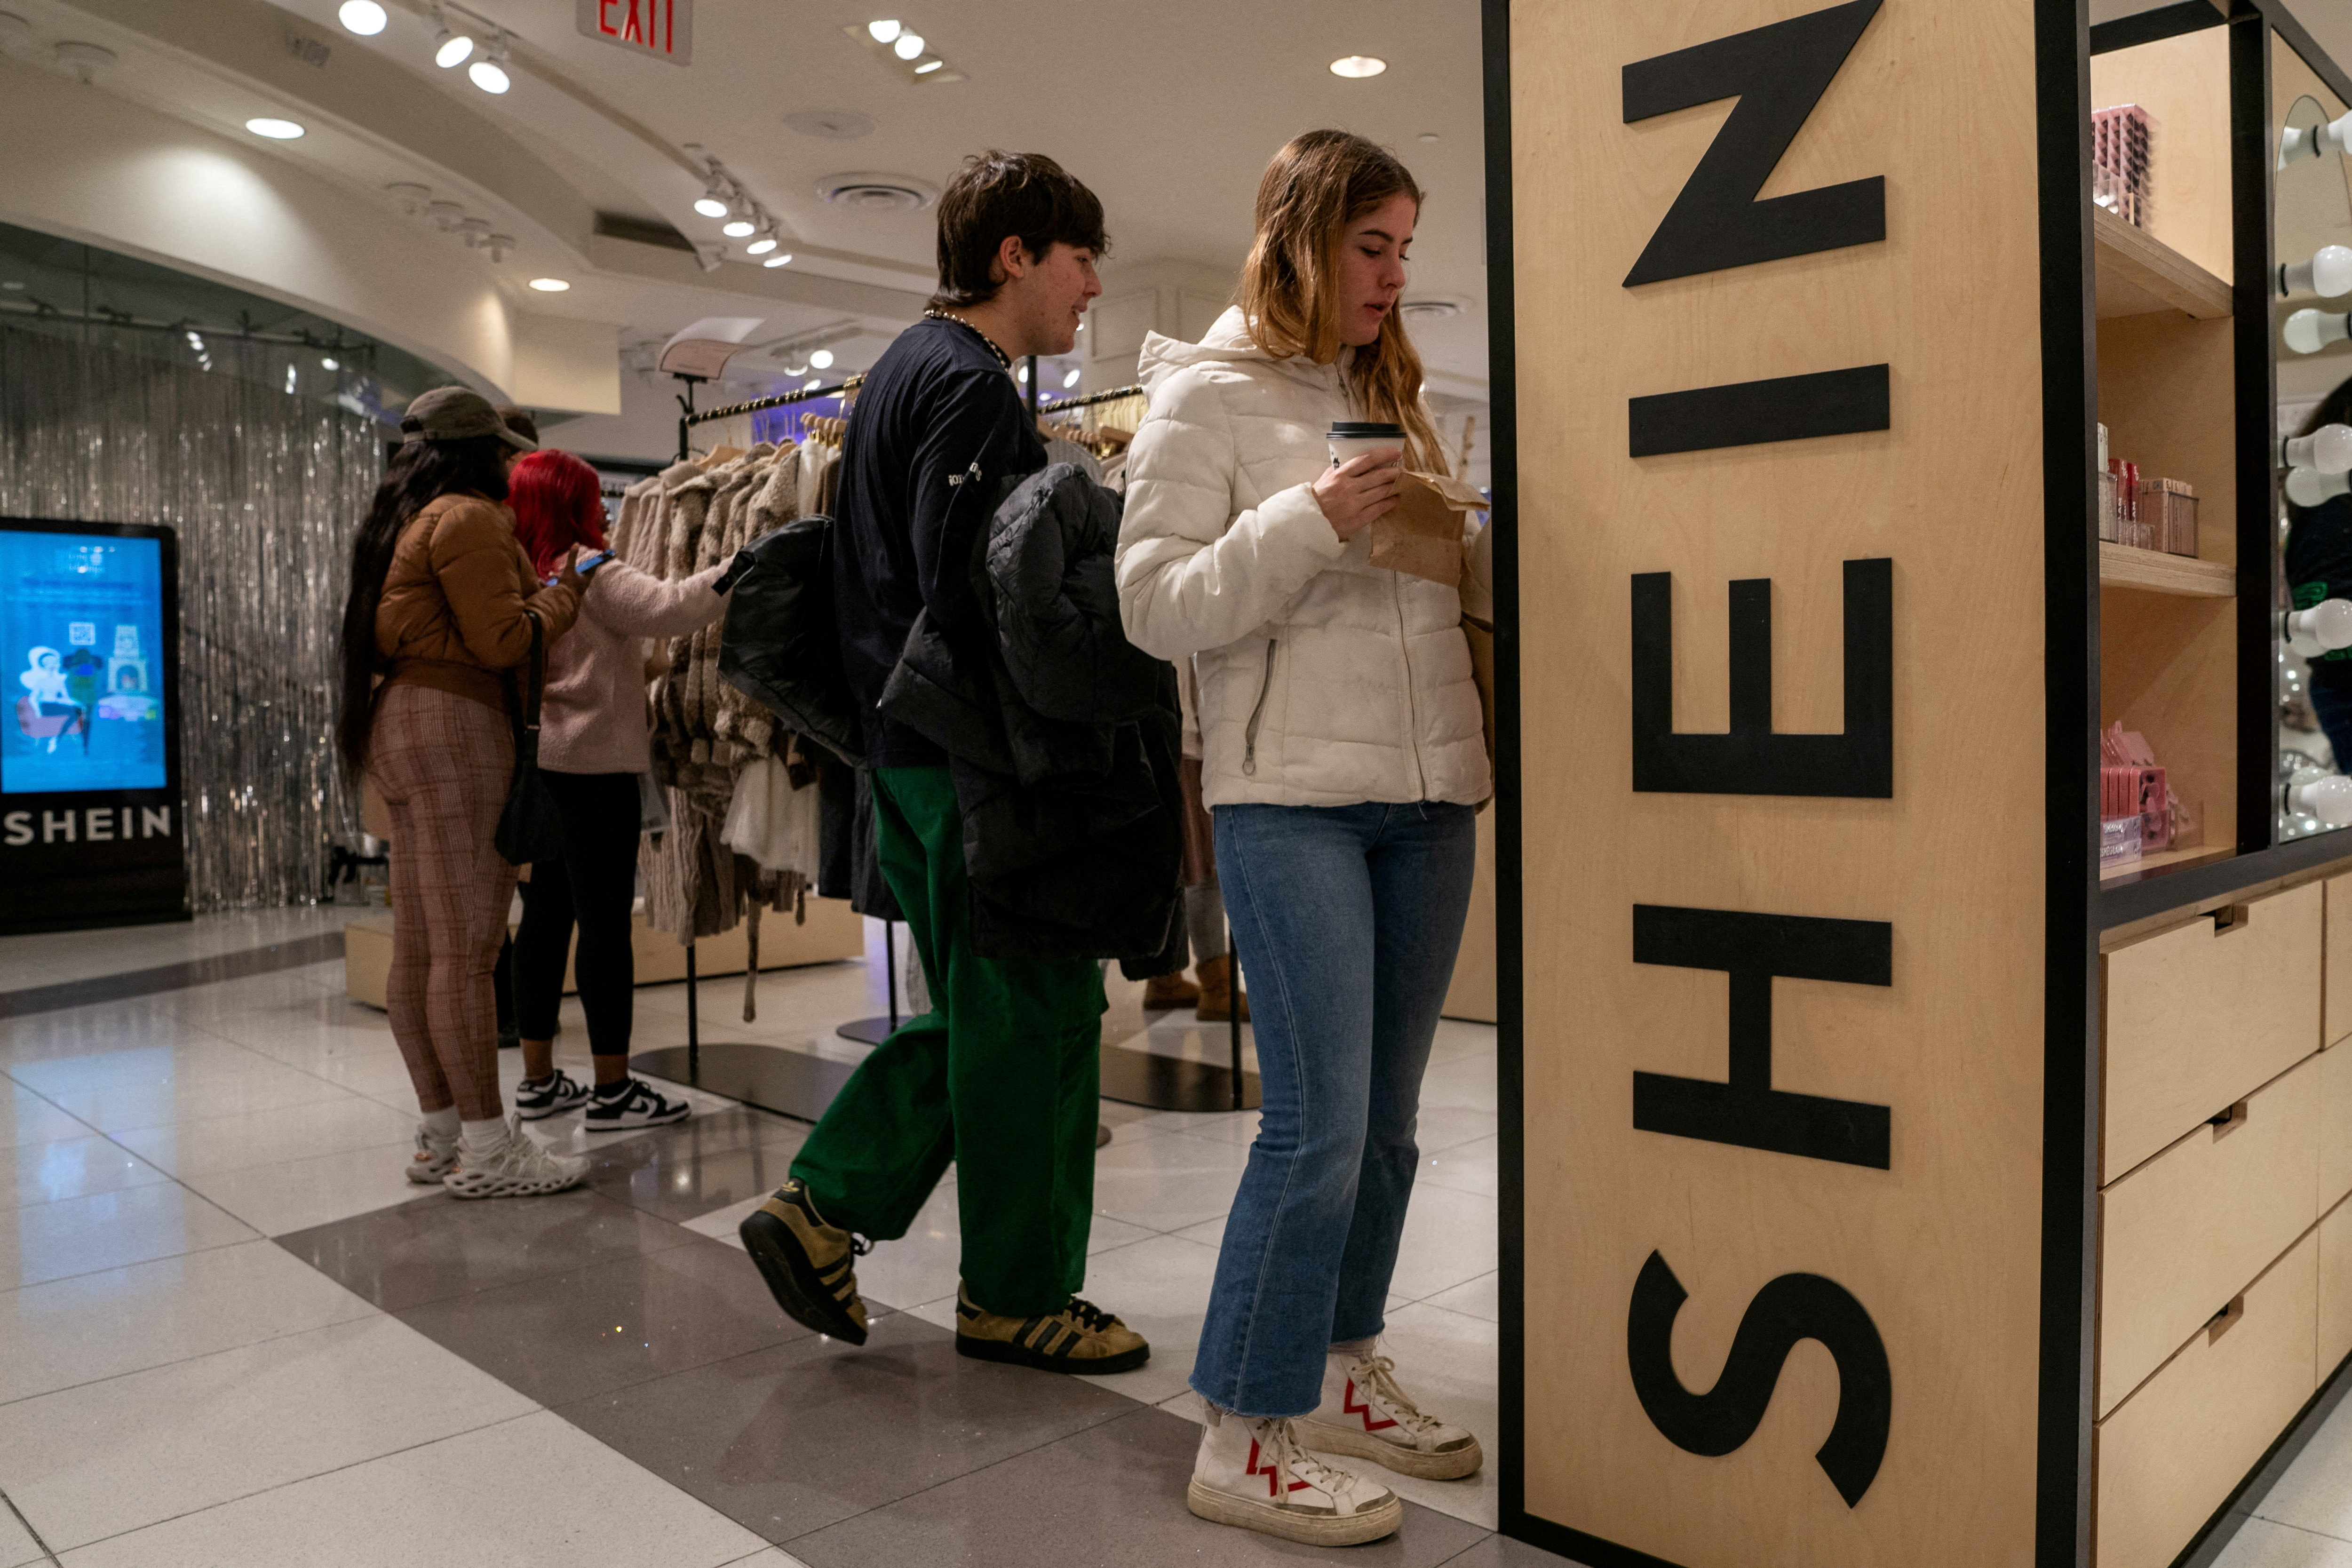 Shein's IPO: Unpacking Everything You Need to Know